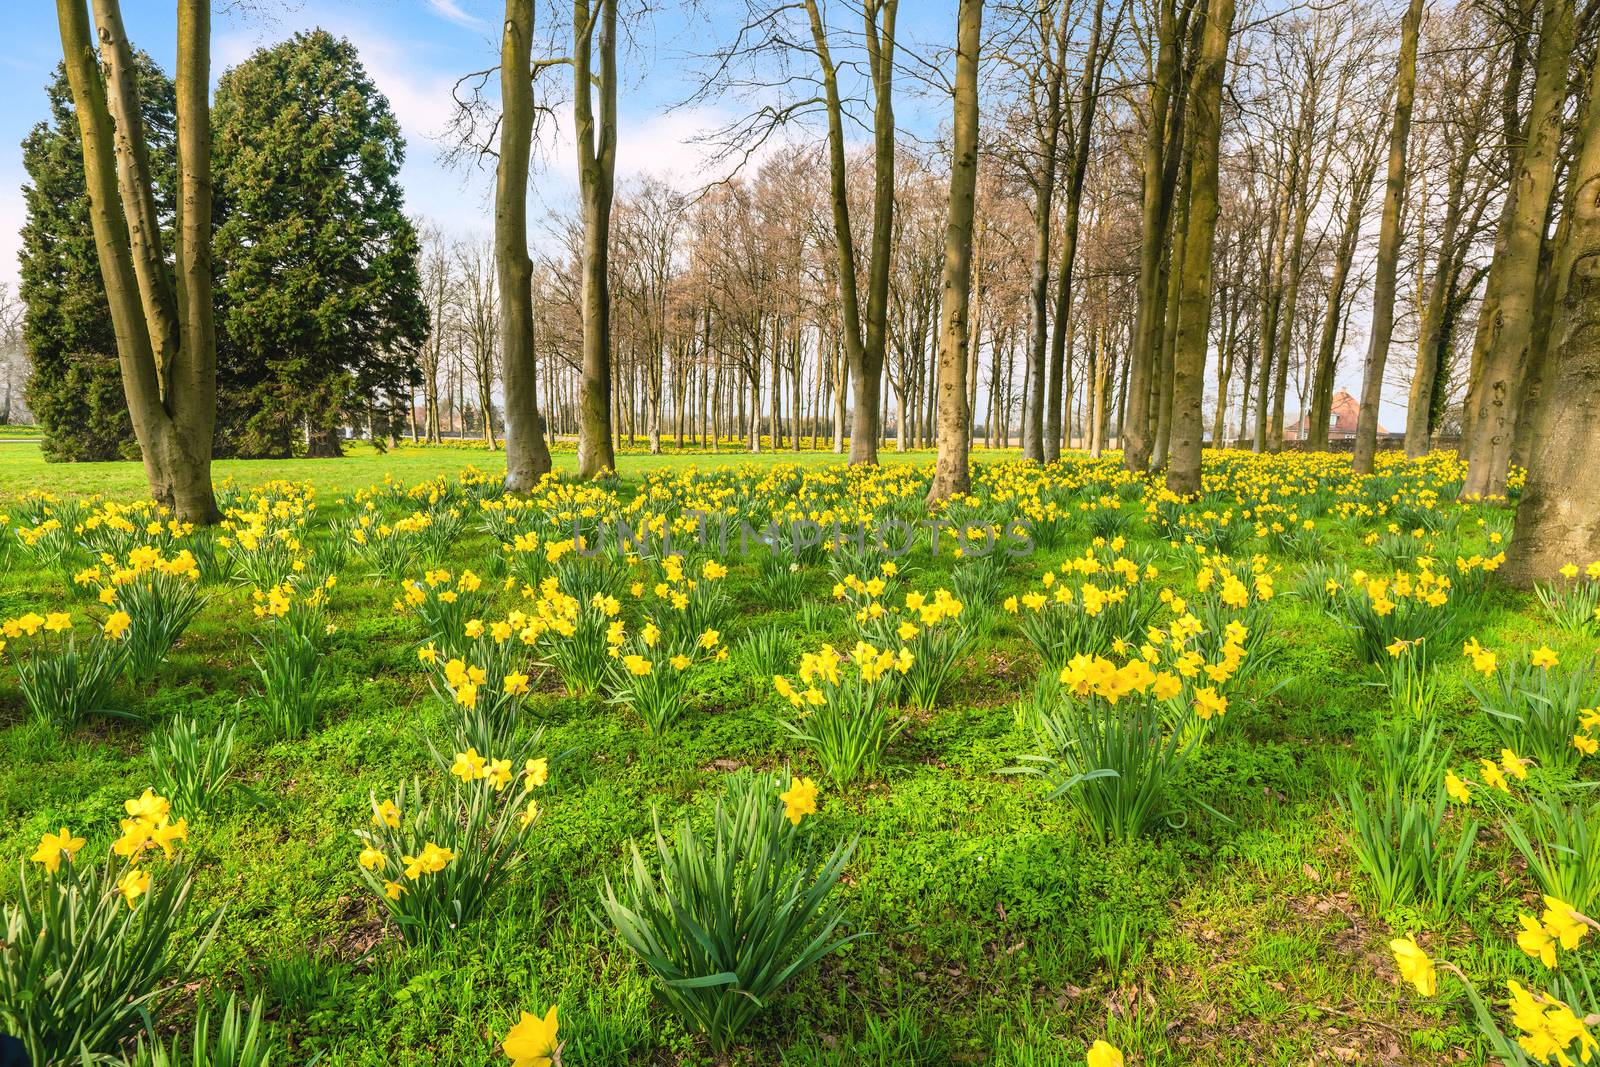 Park filled with yellow daffodils in the spring by Sportactive